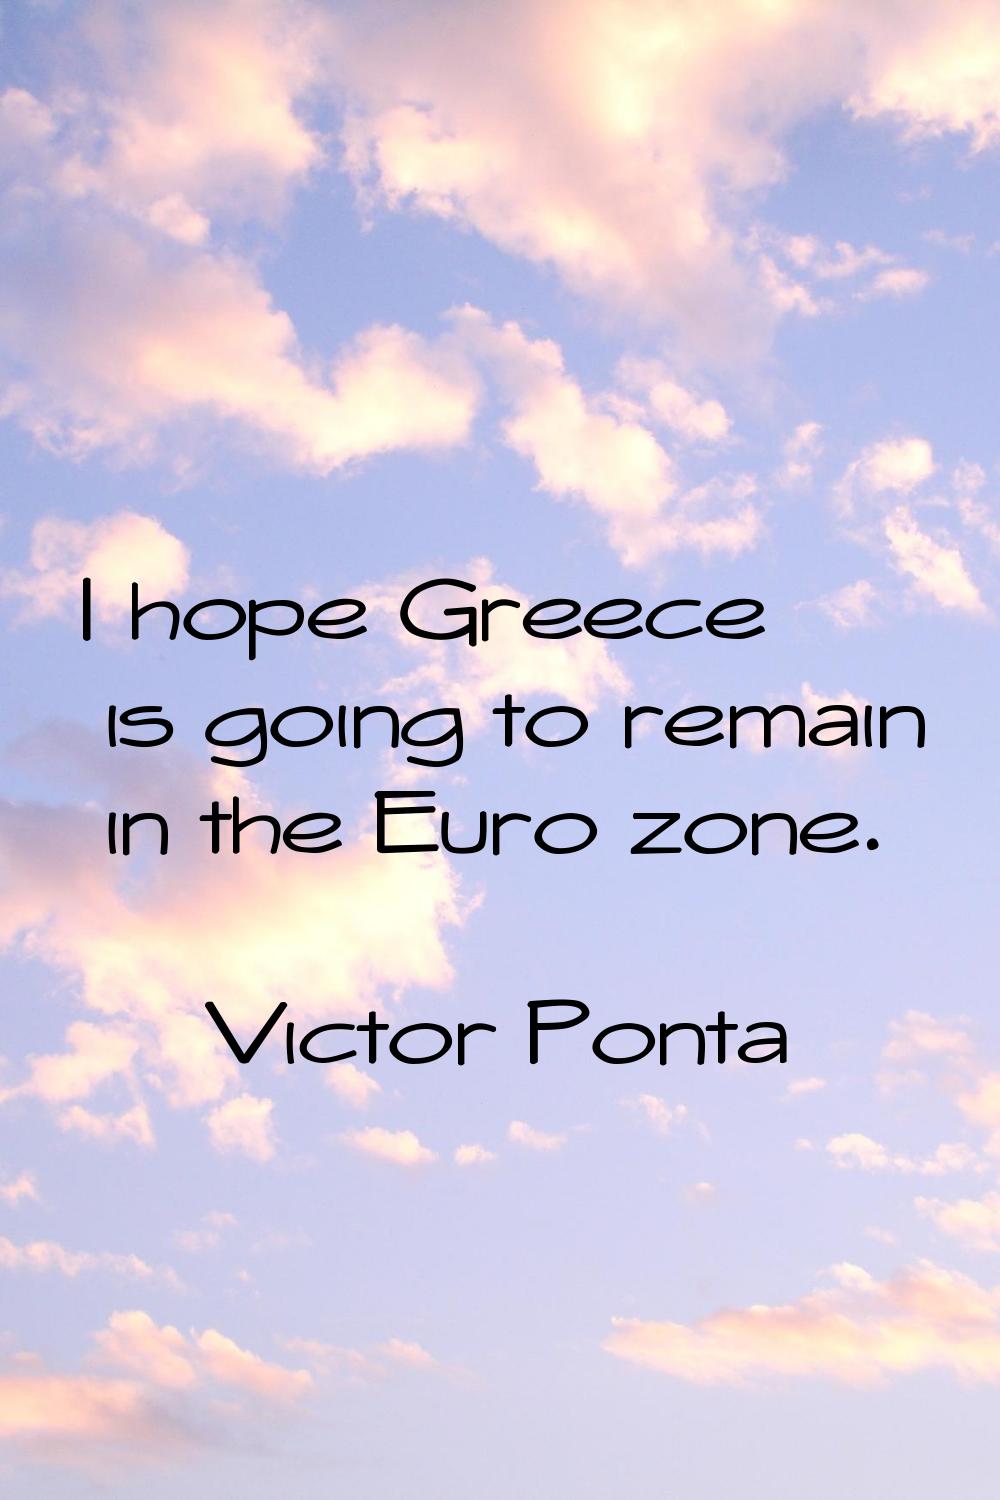 I hope Greece is going to remain in the Euro zone.